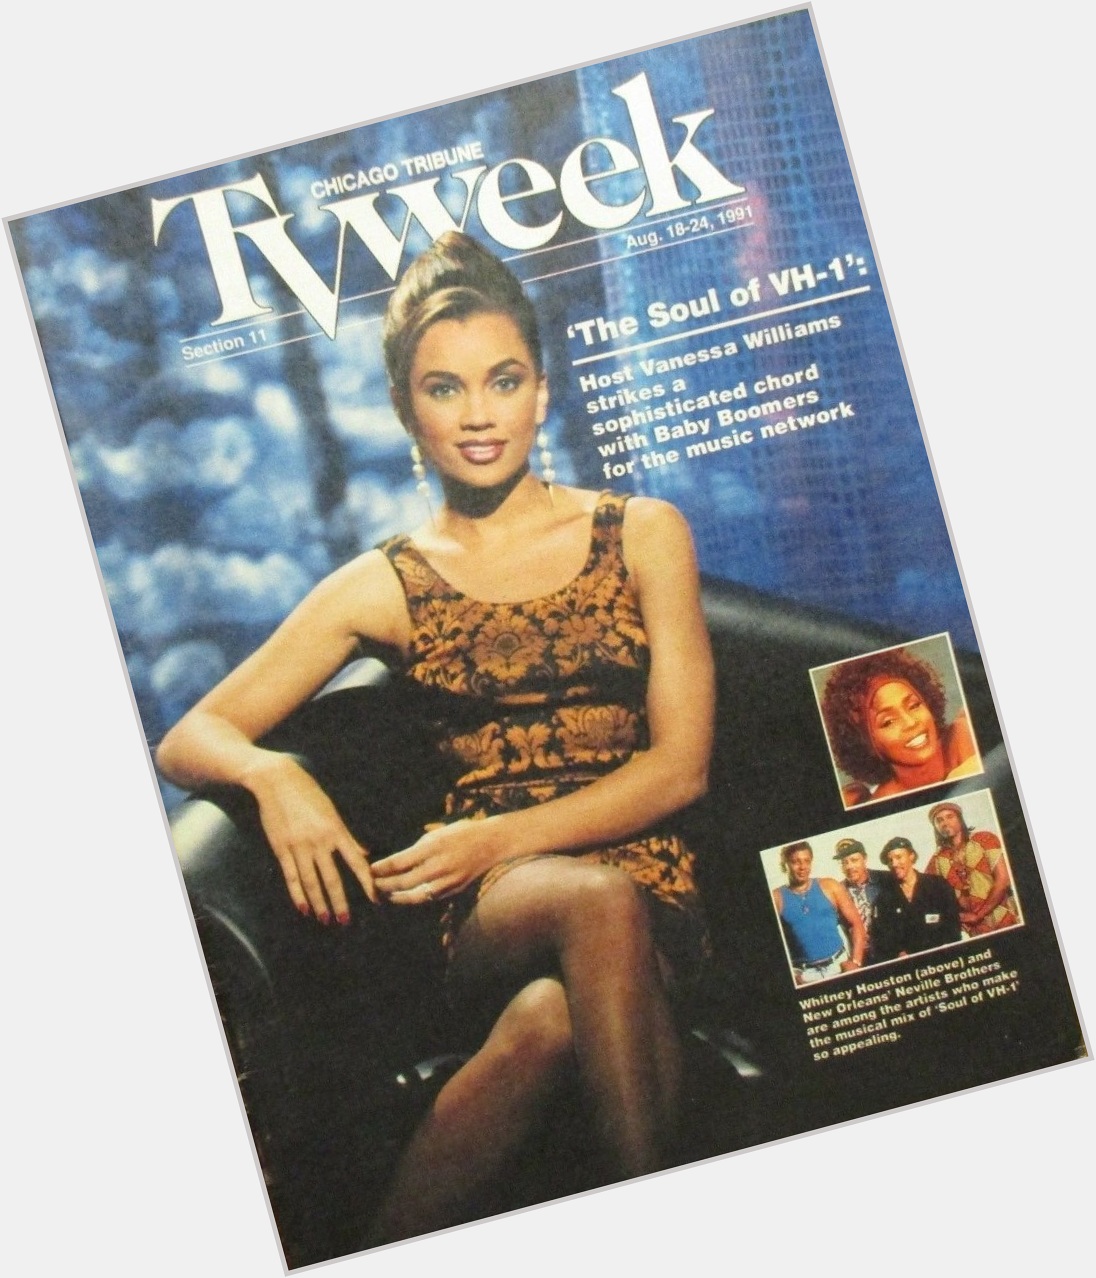 Happy Birthday to Vanessa Williams, born on this day in 1963
Chicago Tribune TV Week.  August 18-24, 1991 